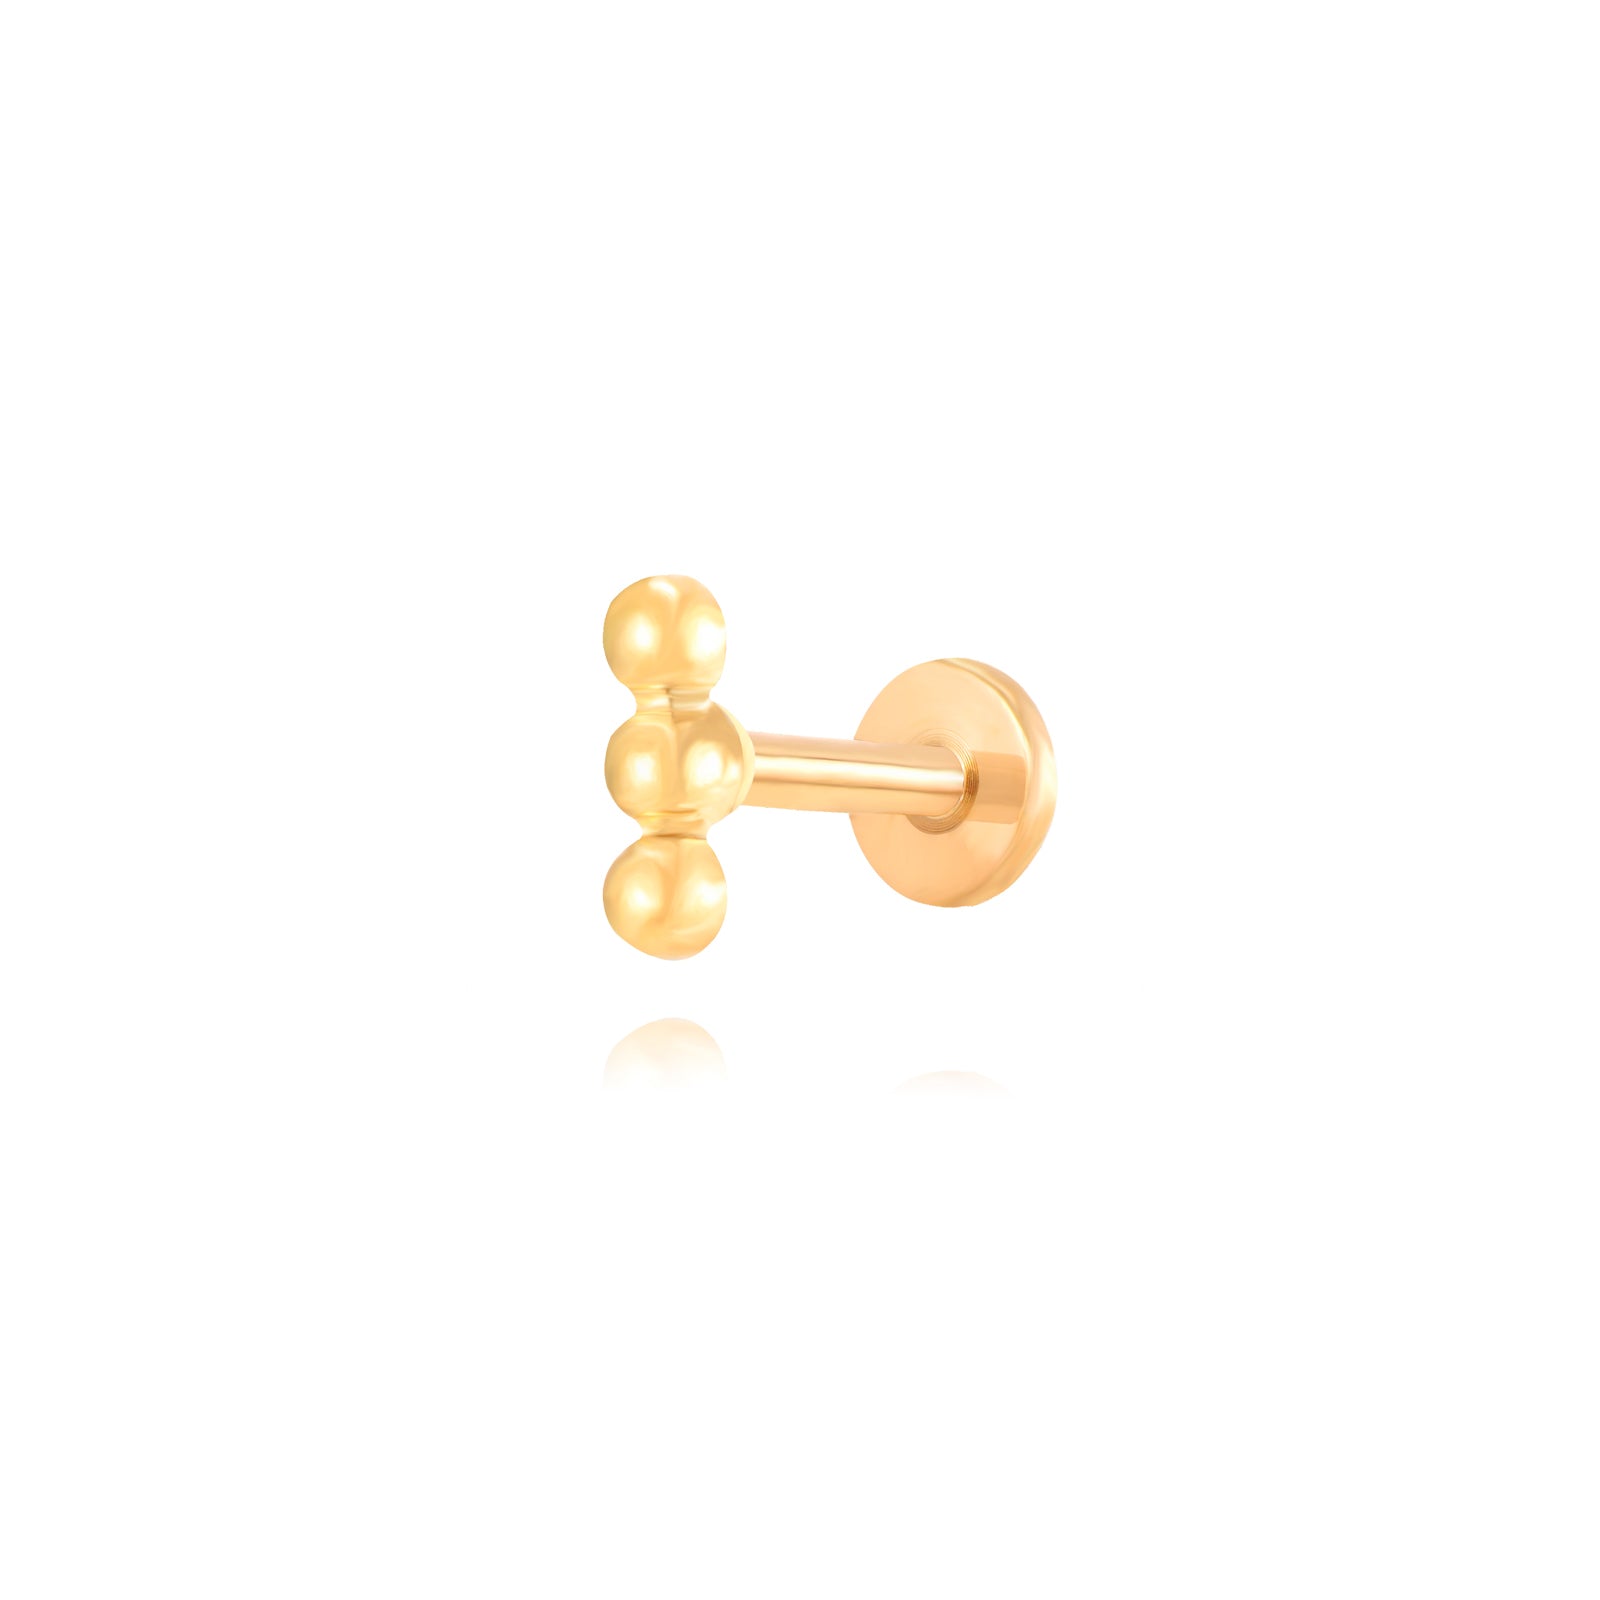 Dot Piercing in Sterling Silver Gold Plated